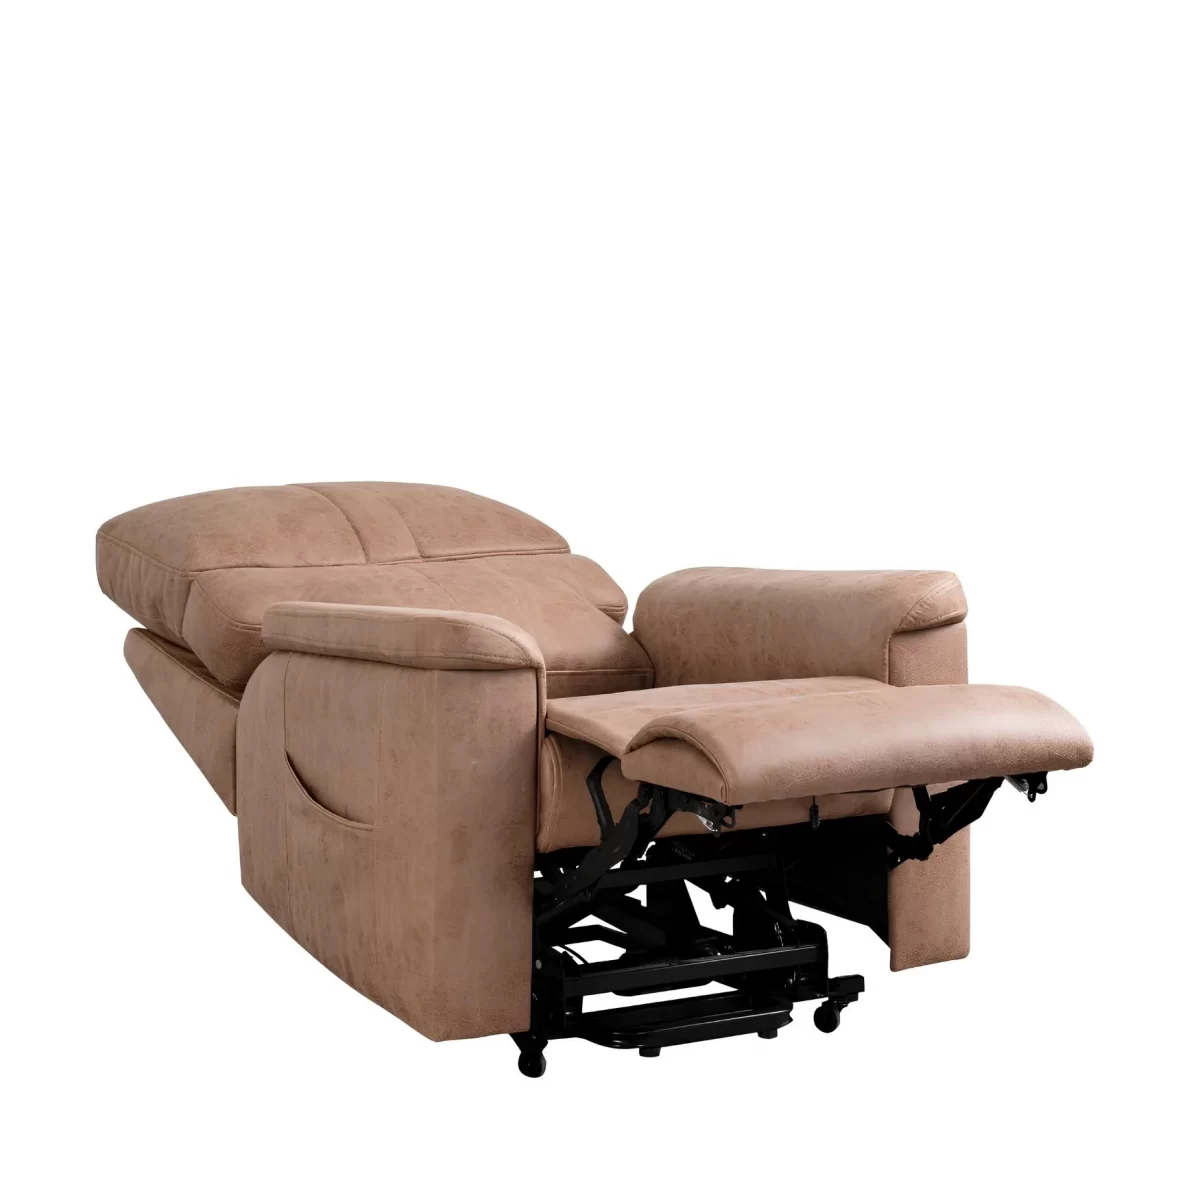 velton reclining sofa lift for patience chair for hospital 4